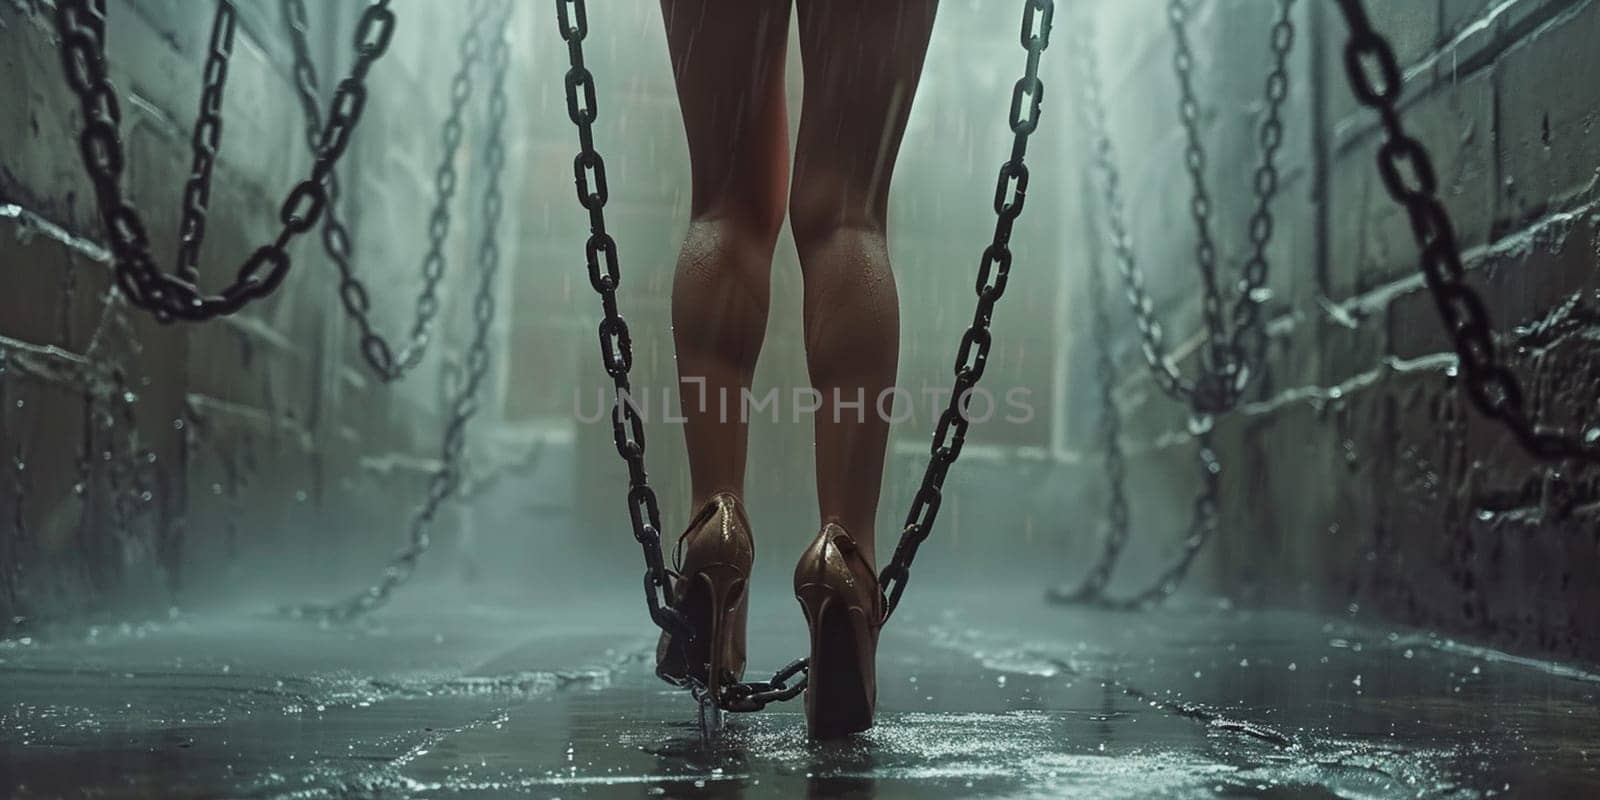 Female bodybuilder lifting chain in gym, fitness girl posing in chains. High quality photo